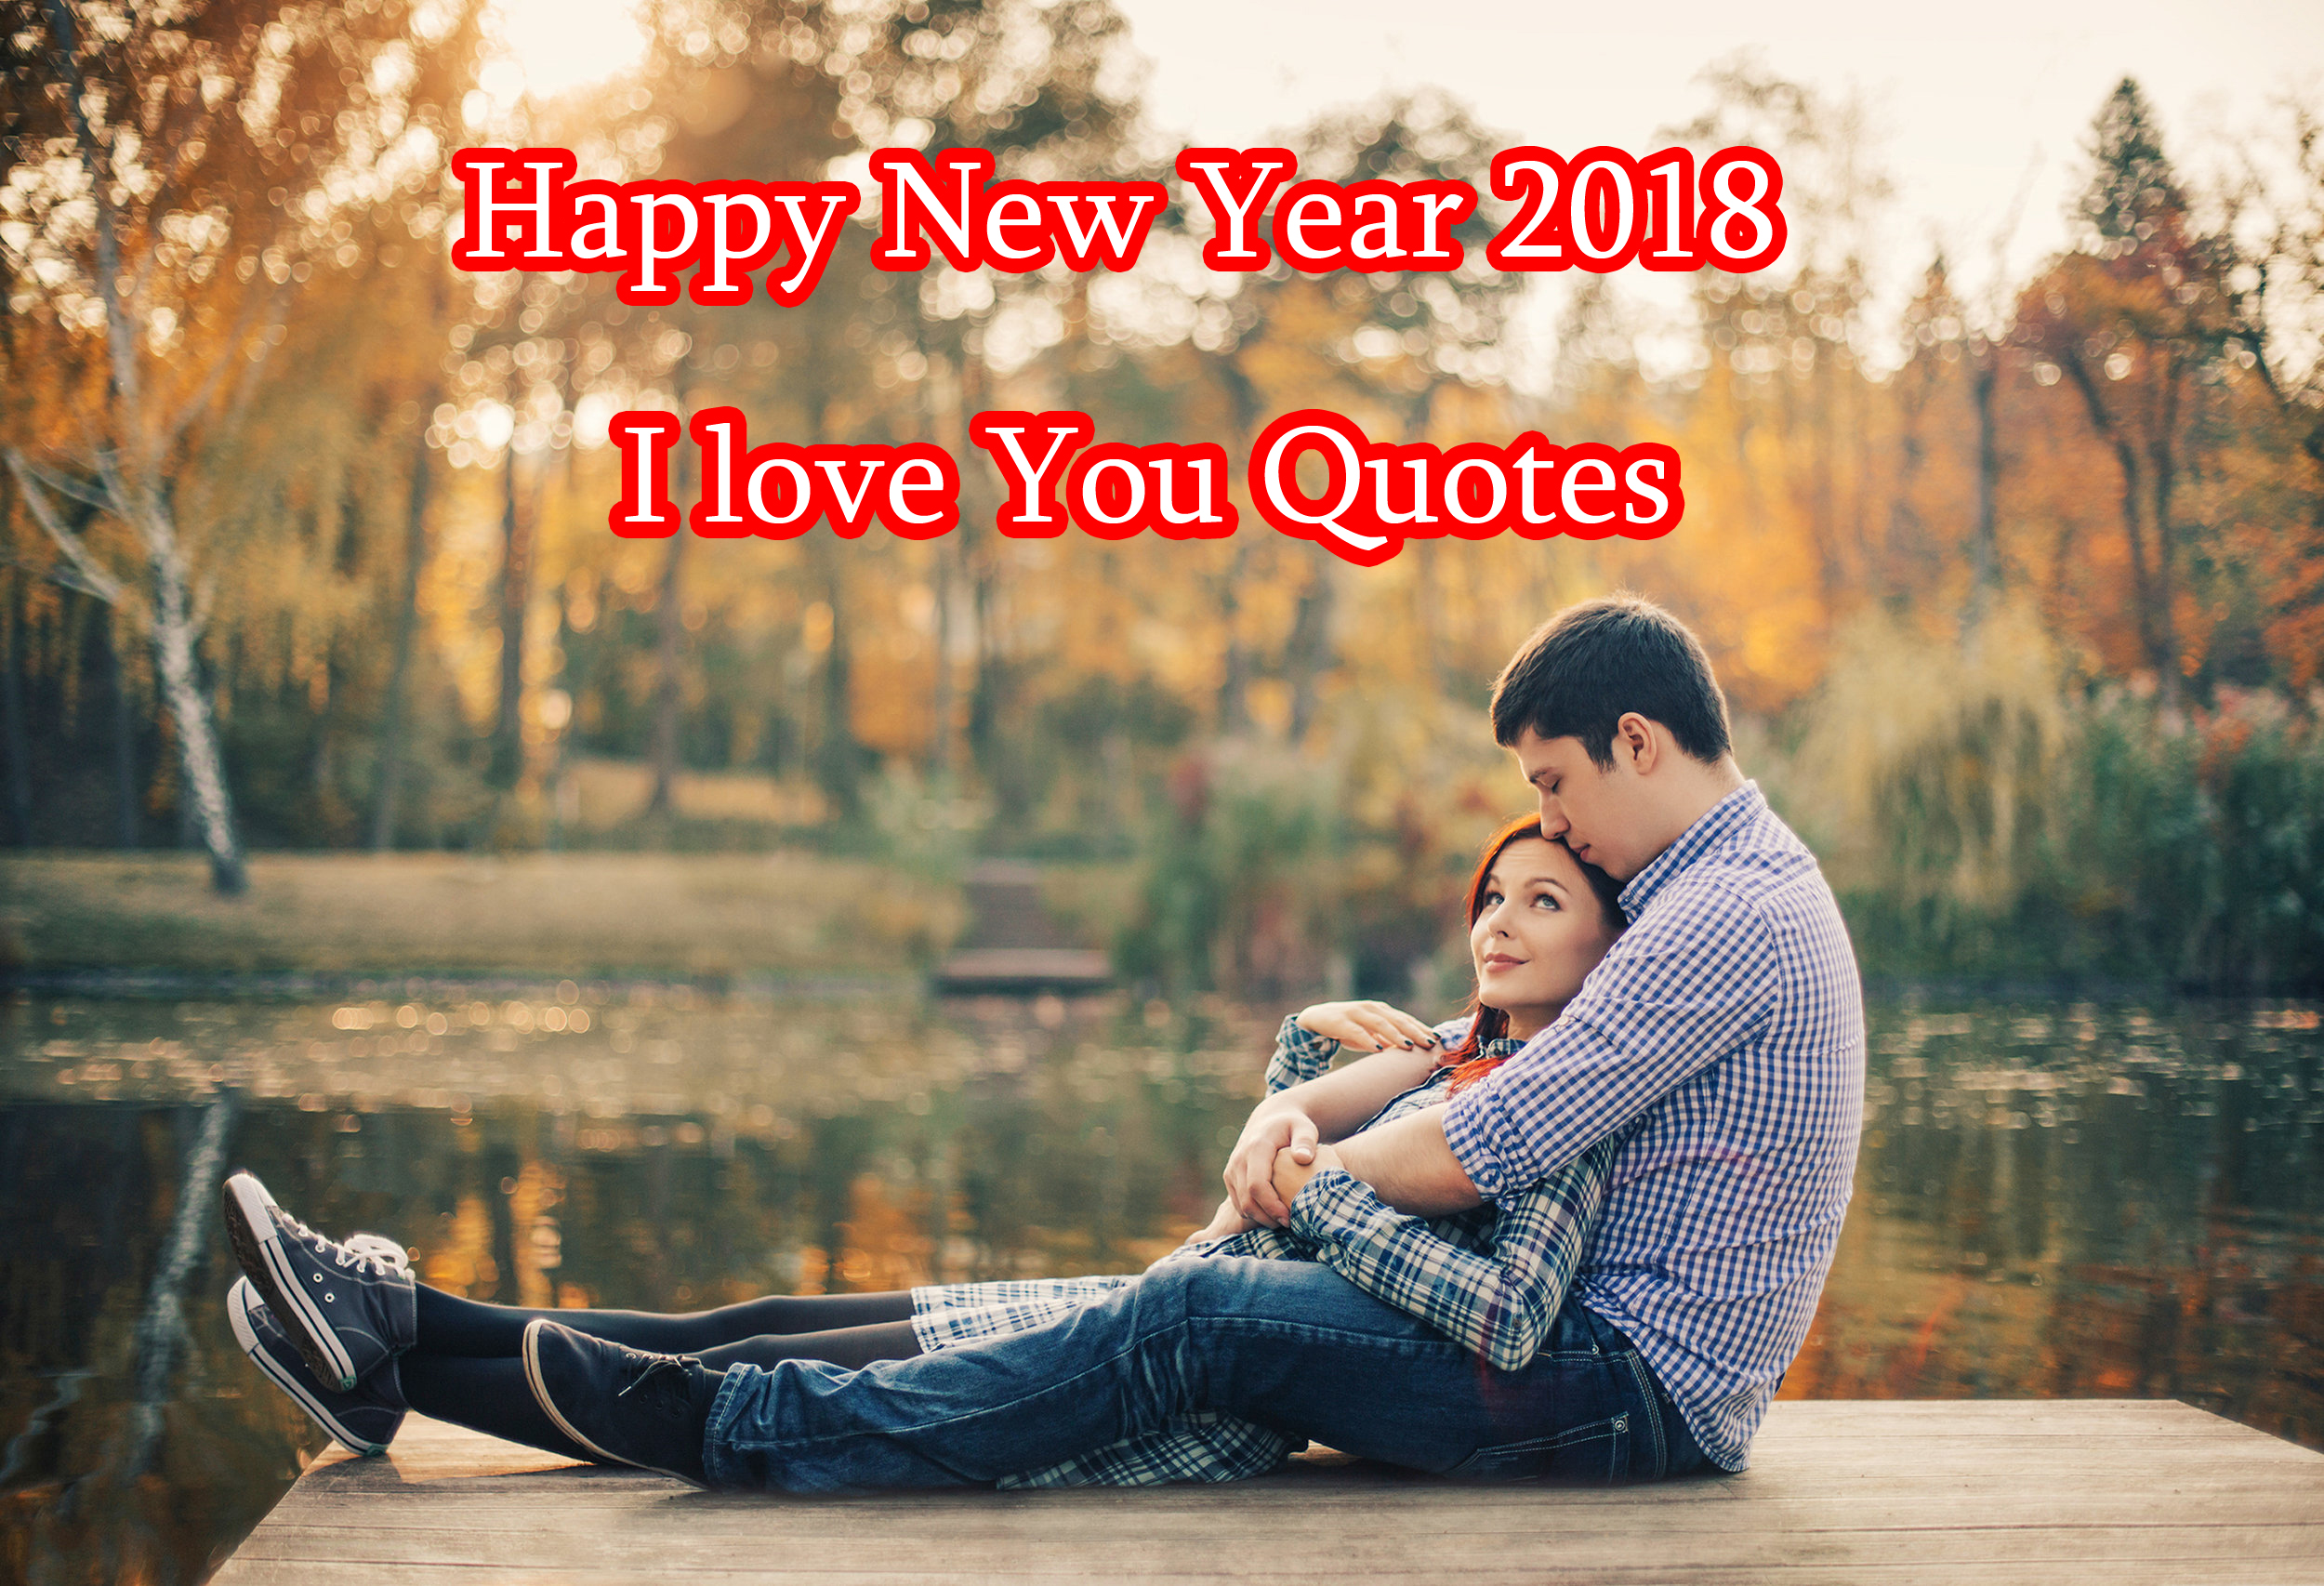 20 Happy New Year 2020 I Love You Quotes Images For Couples